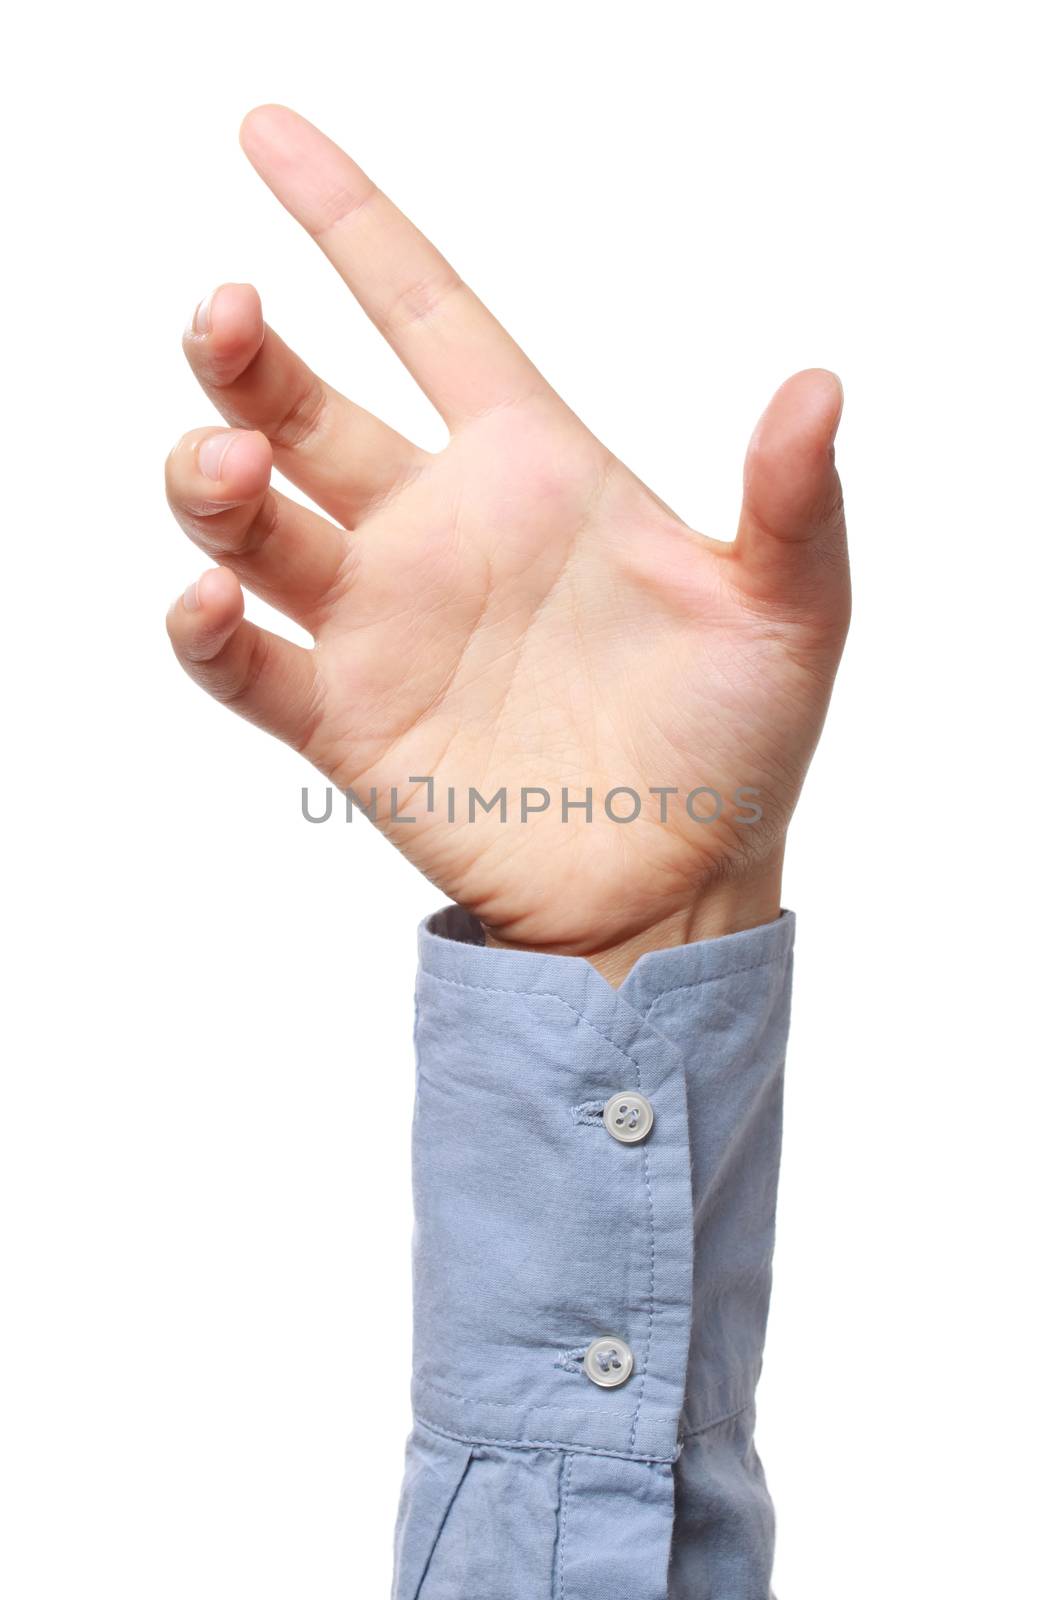 Hand Positioned to Hold a Product by melpomene